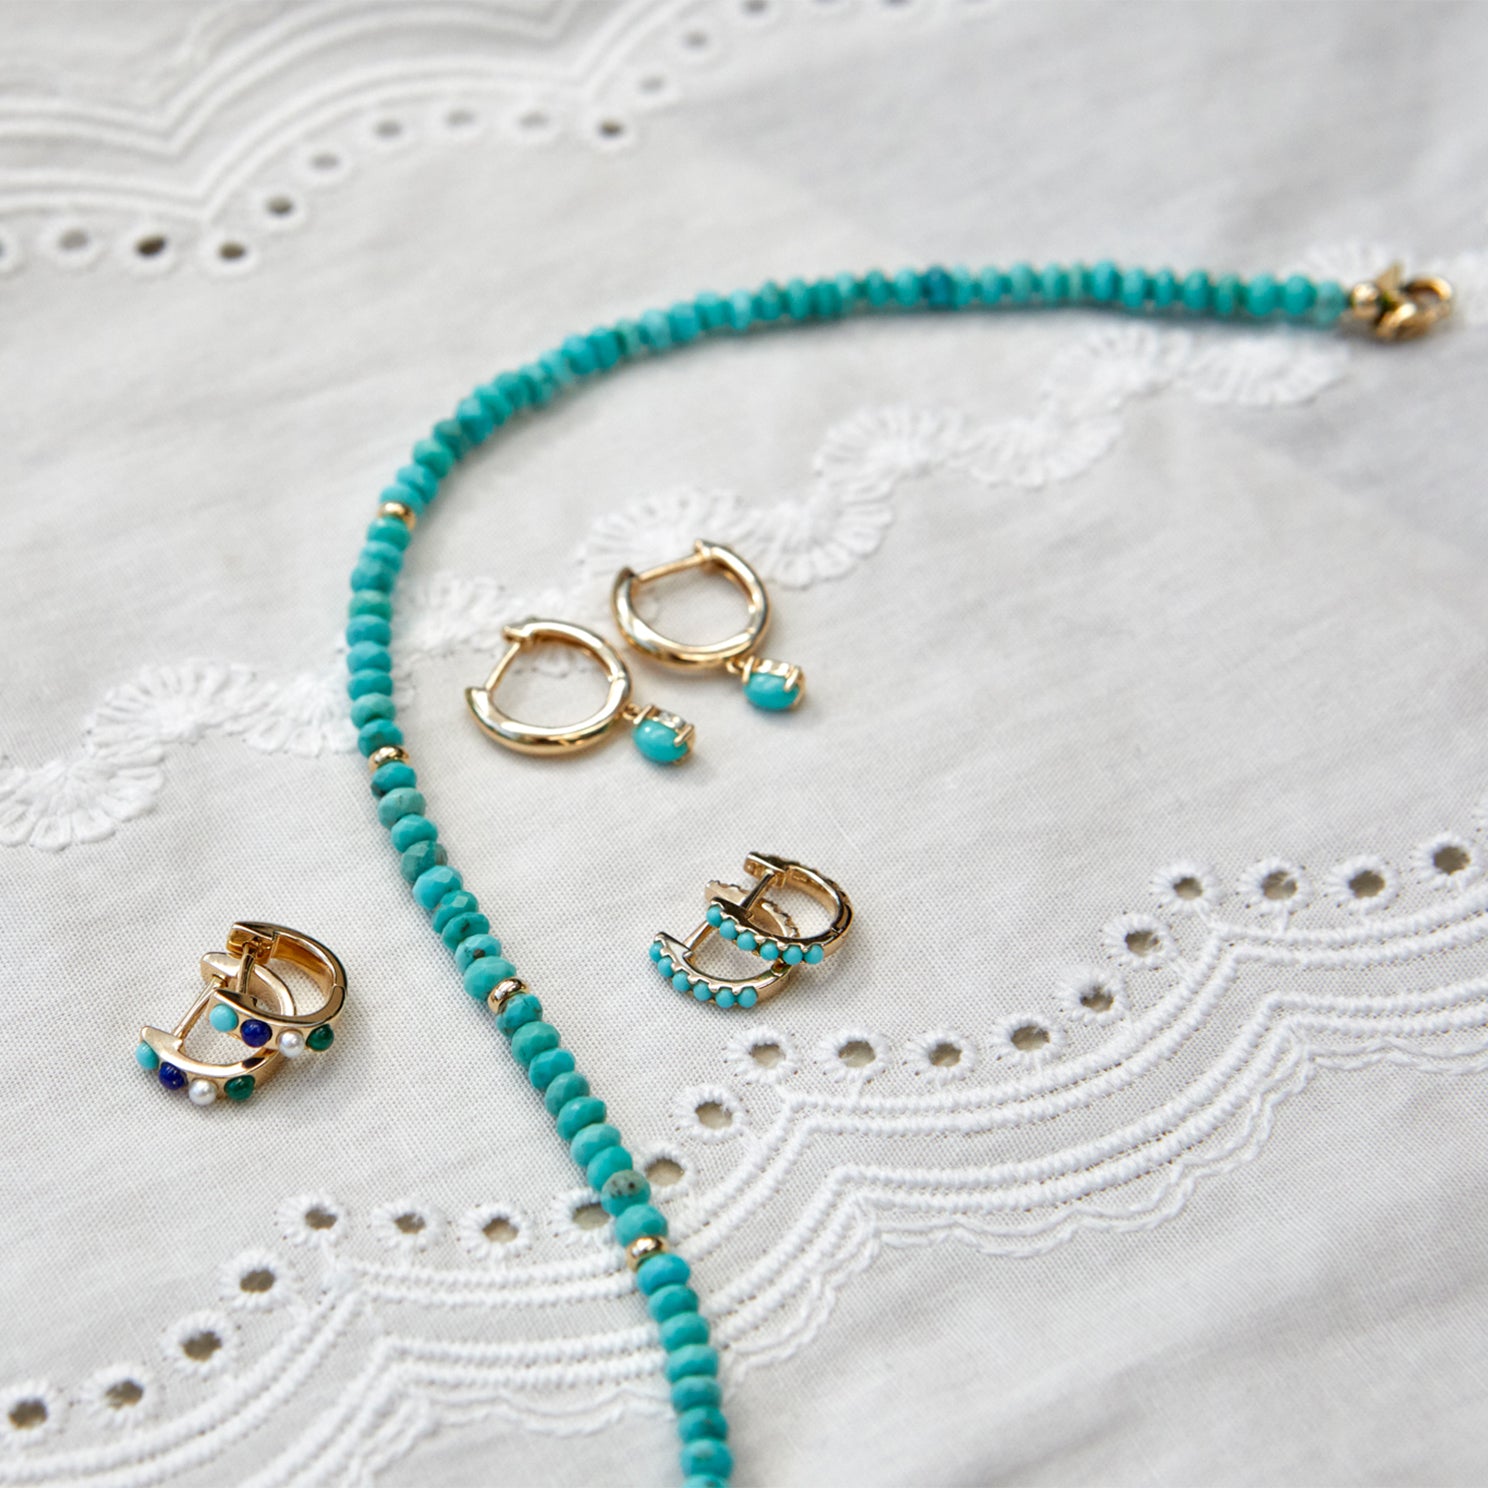 Reversible Diamond & Turquoise Mini Huggie Earring in 14k yellow gold next to gold and turquoise earrings and necklace